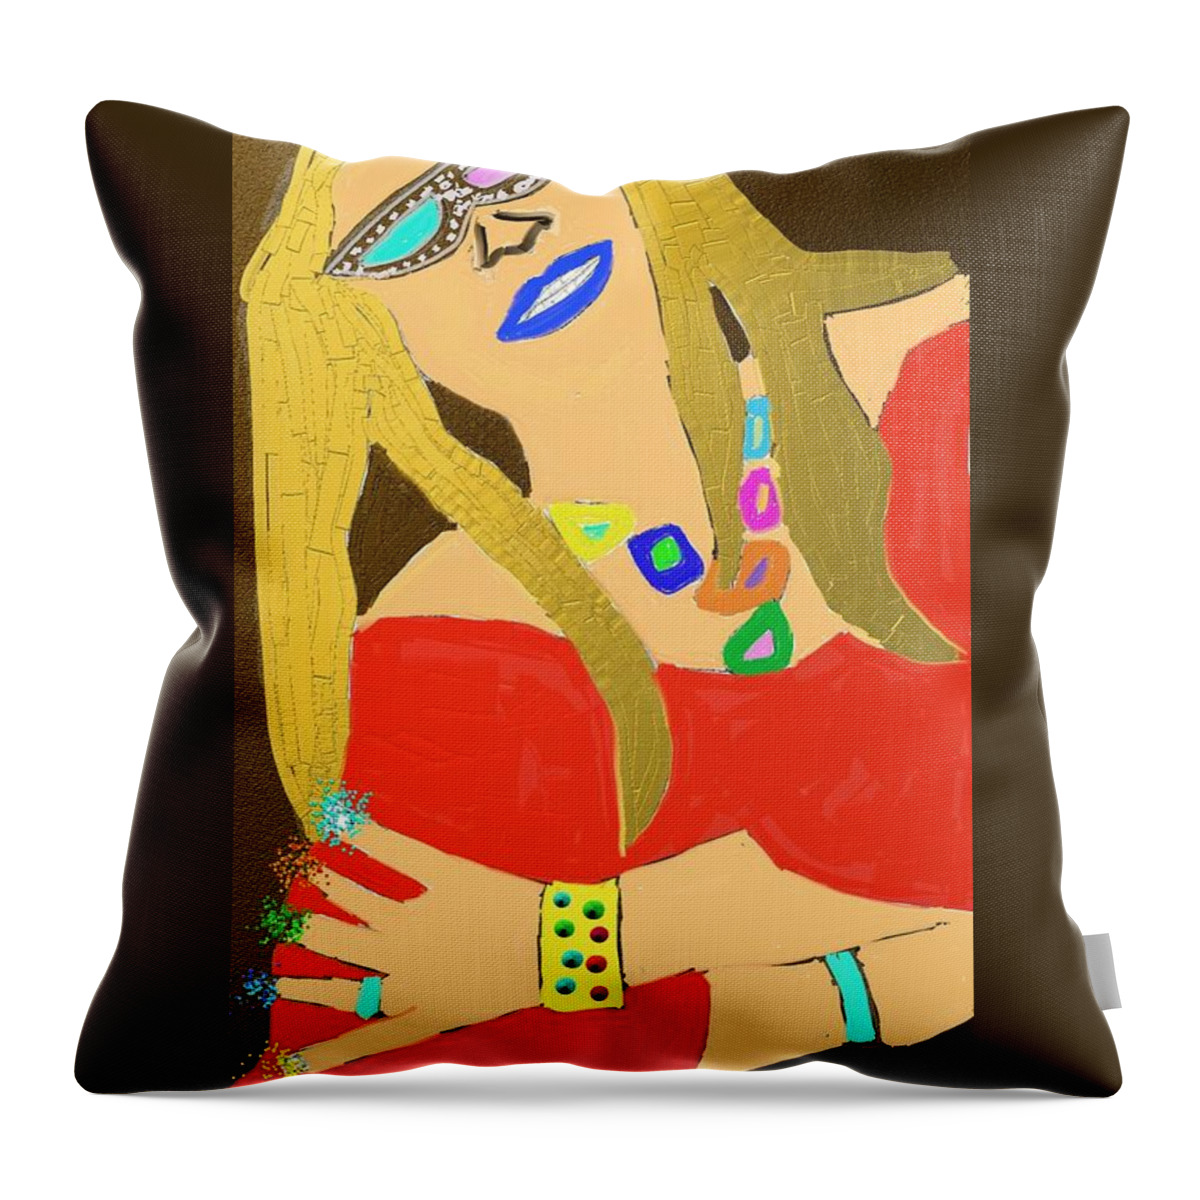  Throw Pillow featuring the drawing Jacqui With Golden Hair by Tony Camm